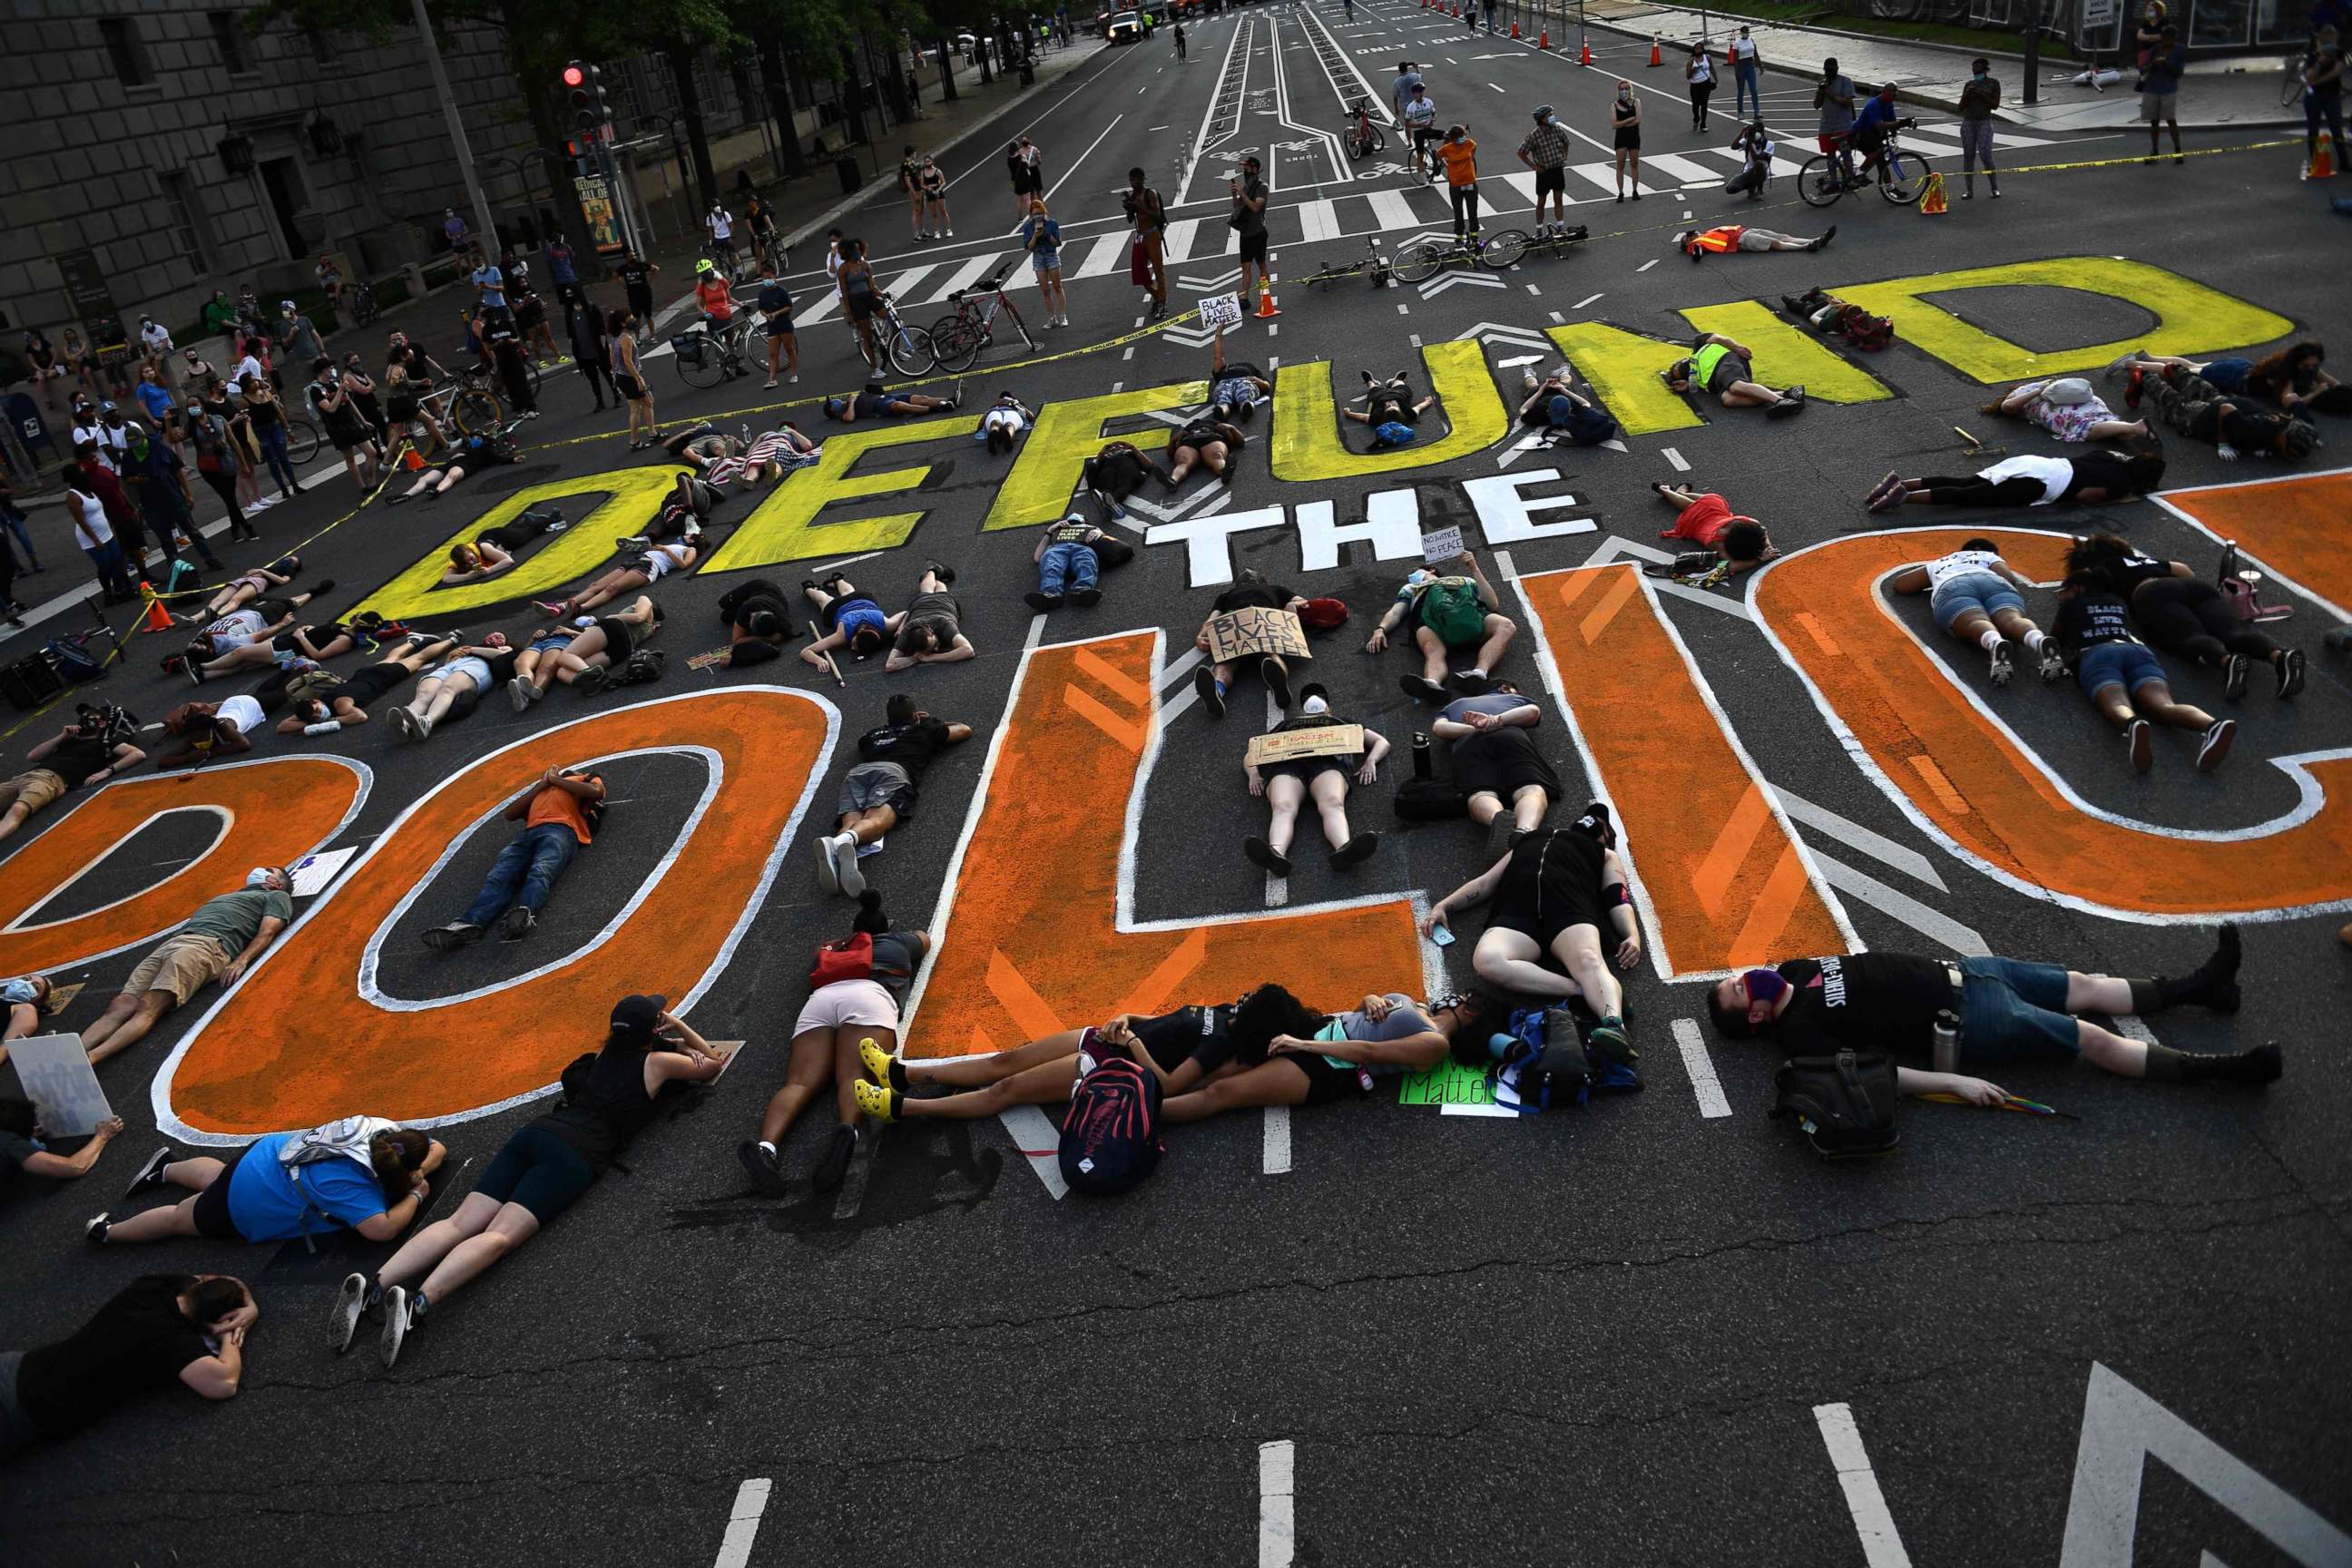 PHOTO: Demonstrators lie on the pavement during a peaceful protest against police brutality and racism, June 6, 2020, in Washington, DC.